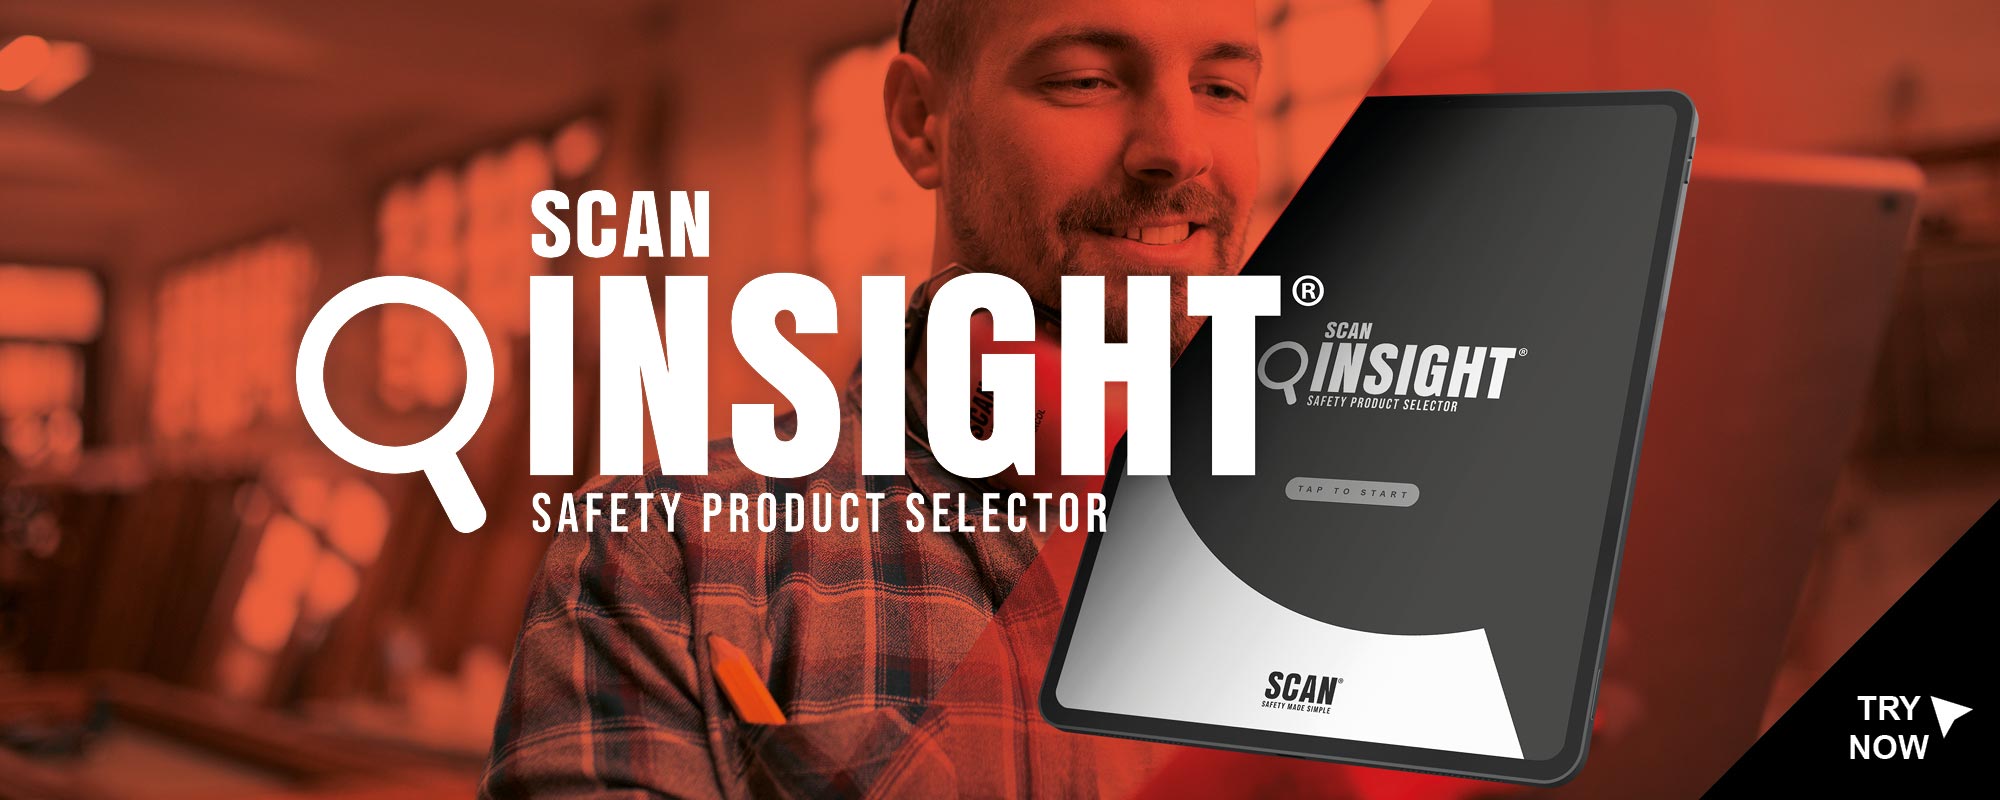 Scan Insights Image